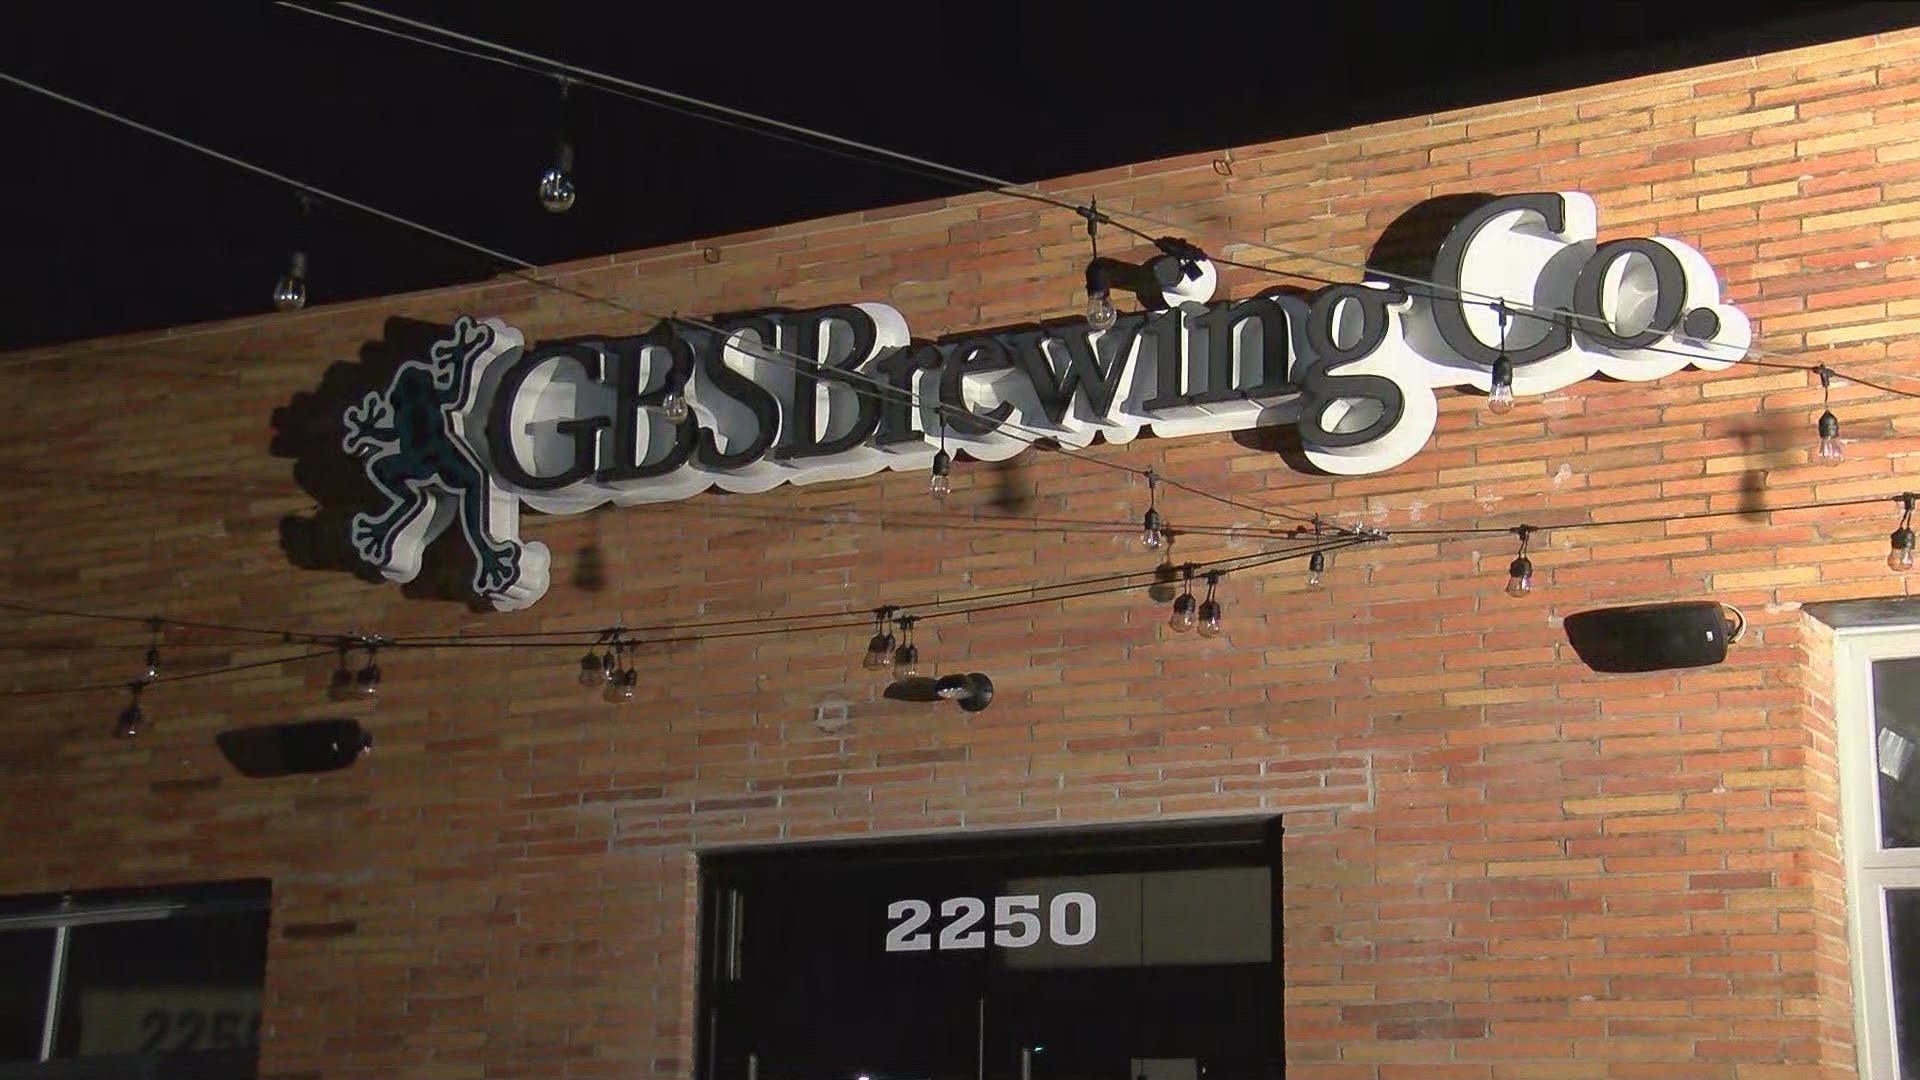 New breweries are coming to the northwest Ohio area, some opening their doors after delays due to the pandemic.